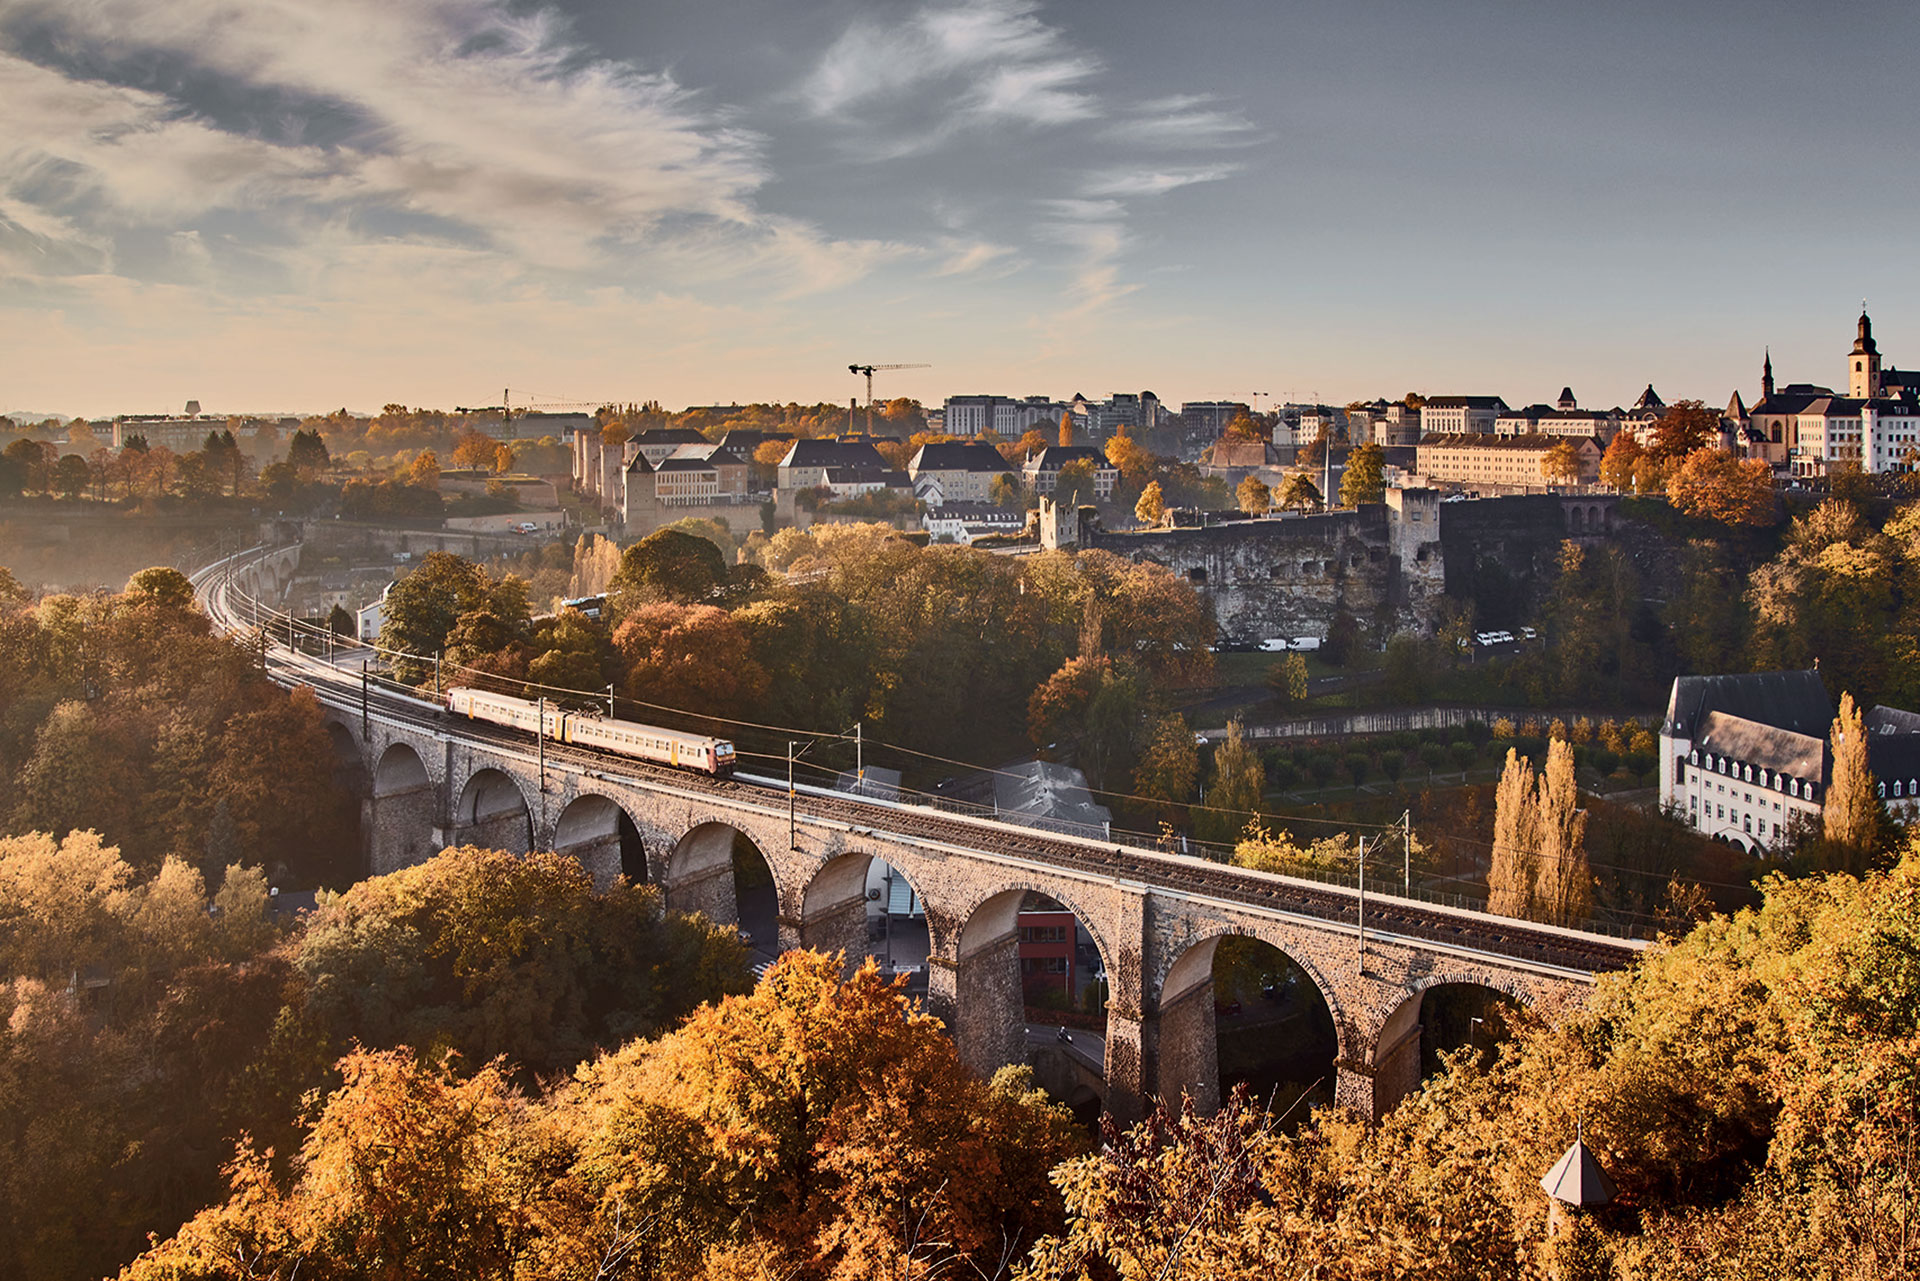 22 good reasons to visit Luxembourg City as a Tourist - The Central